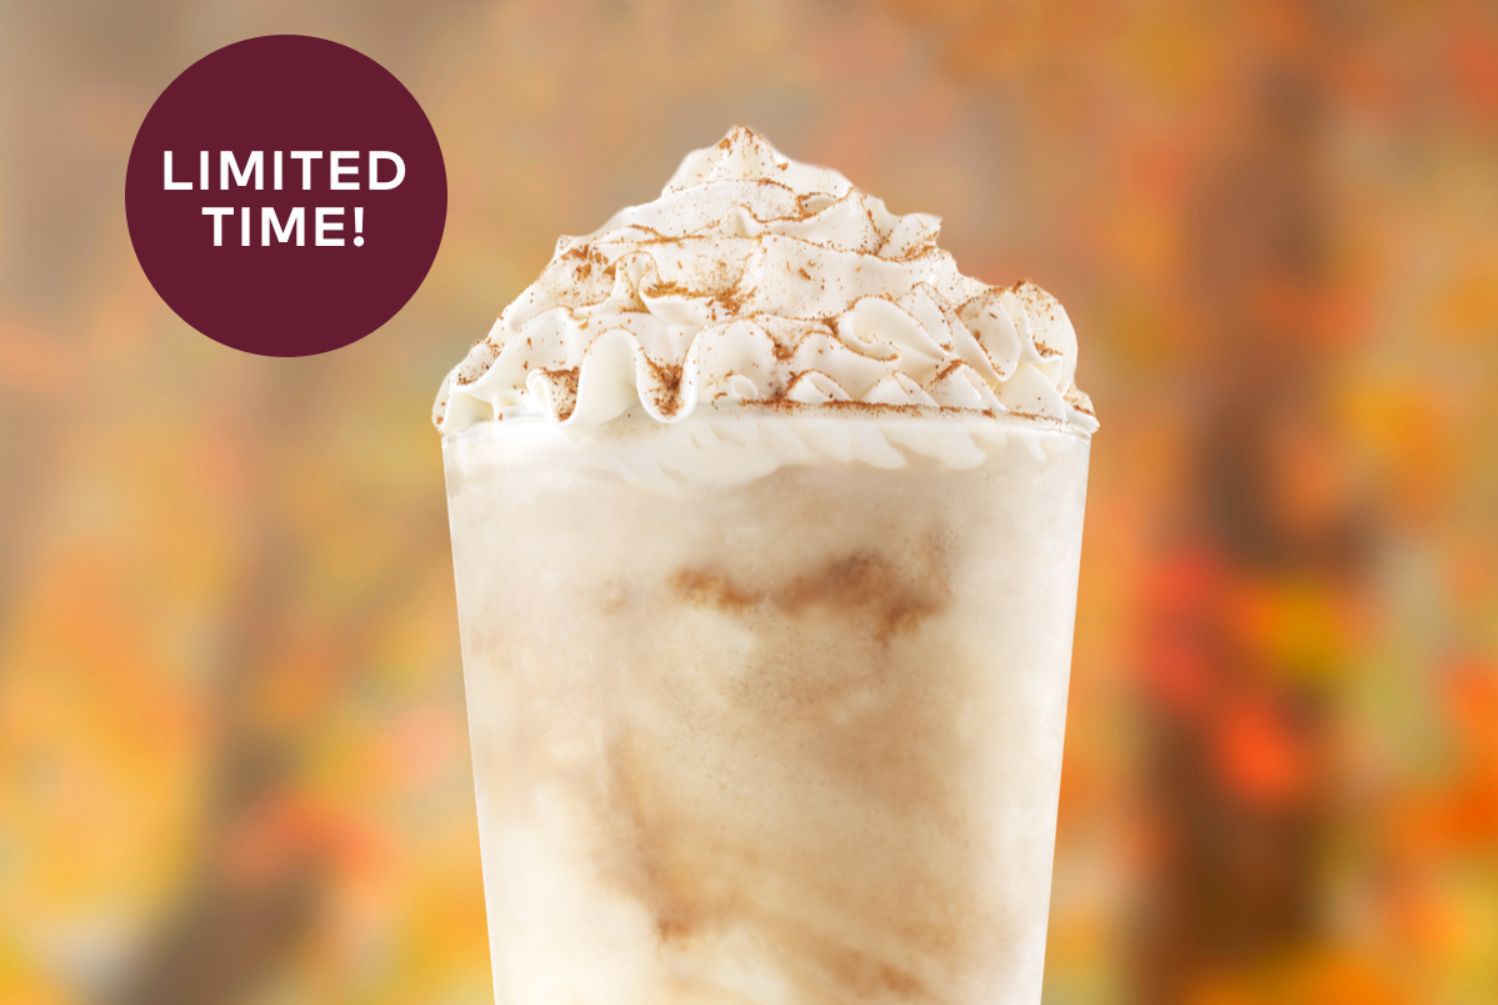 Arby’s Popular Caramel Cinnamon Shake is Back for Limited Time